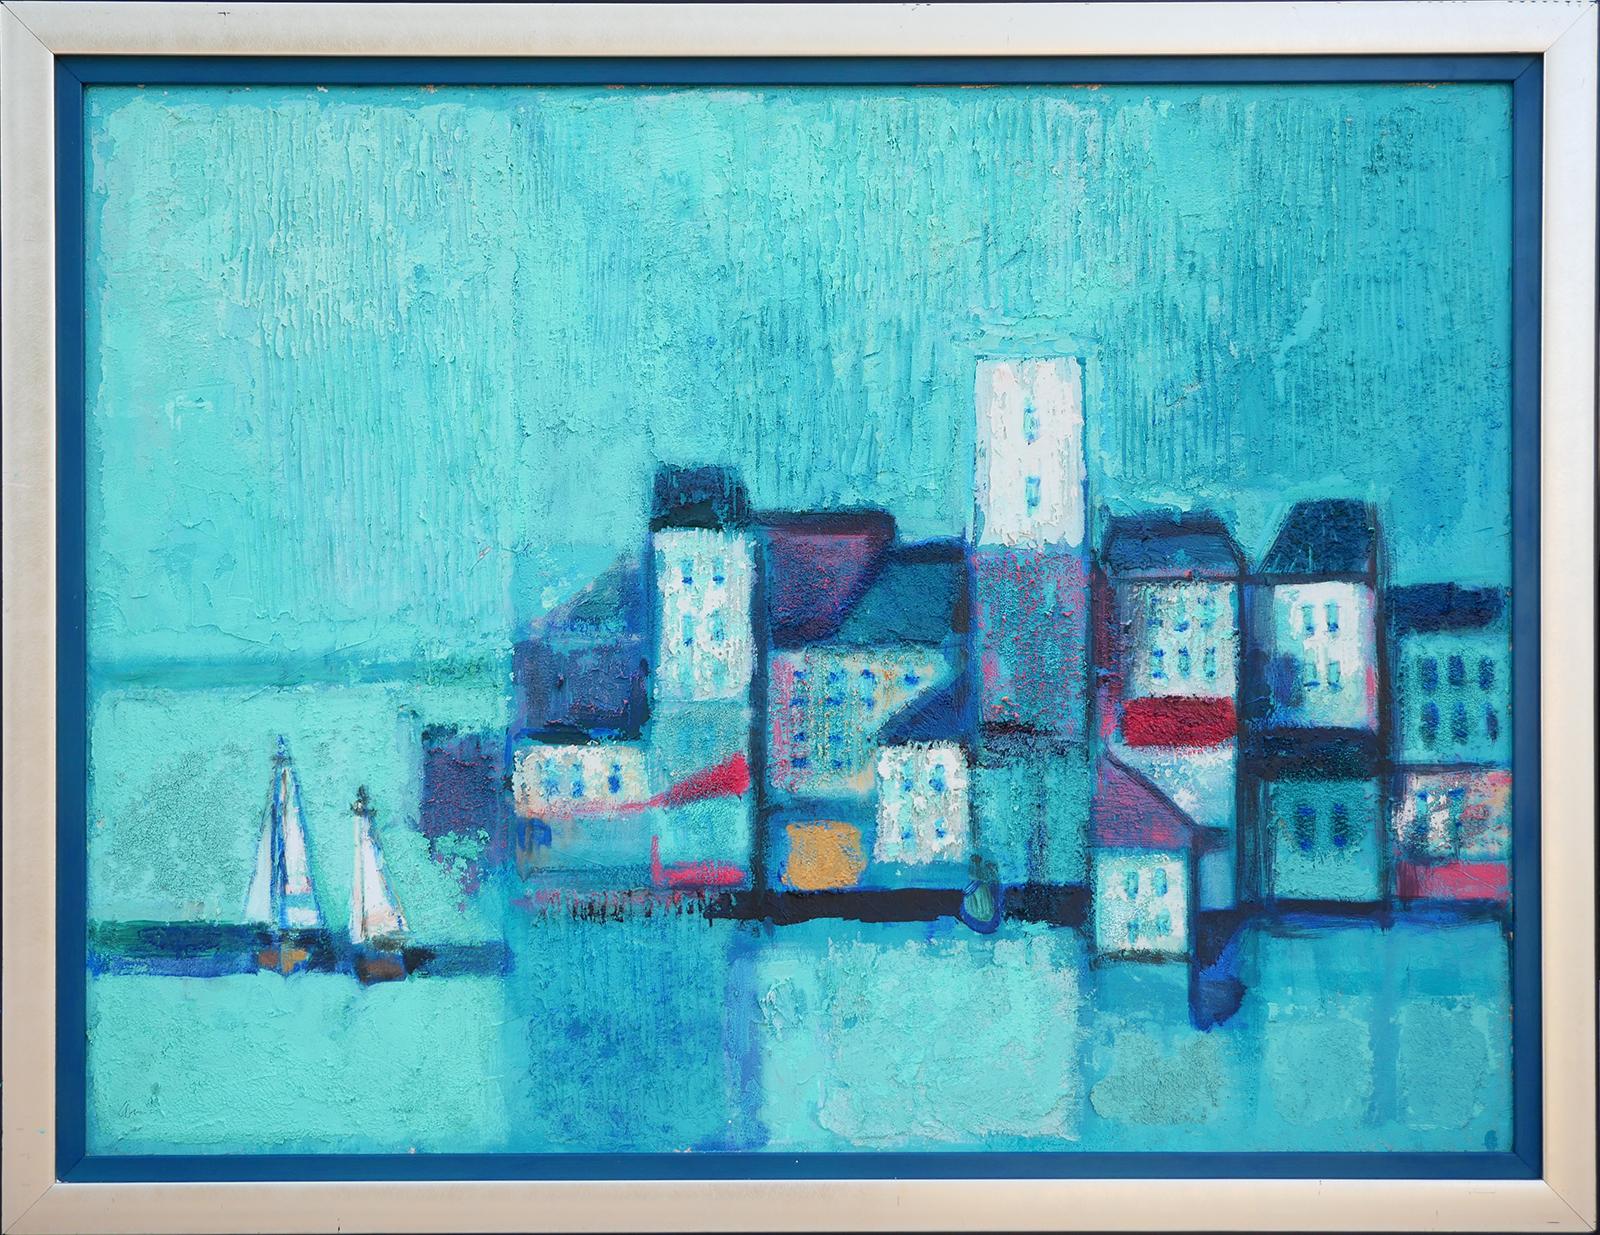 Modern geometric abstract night scene by Houston, TX artist David Adickes. The work features a blue-toned serene cityscape by the sea. Unsigned. Framed in a thick silver painted framed and blue matting.

Dimensions Without Frame: H 29.5 in. x W 39.5